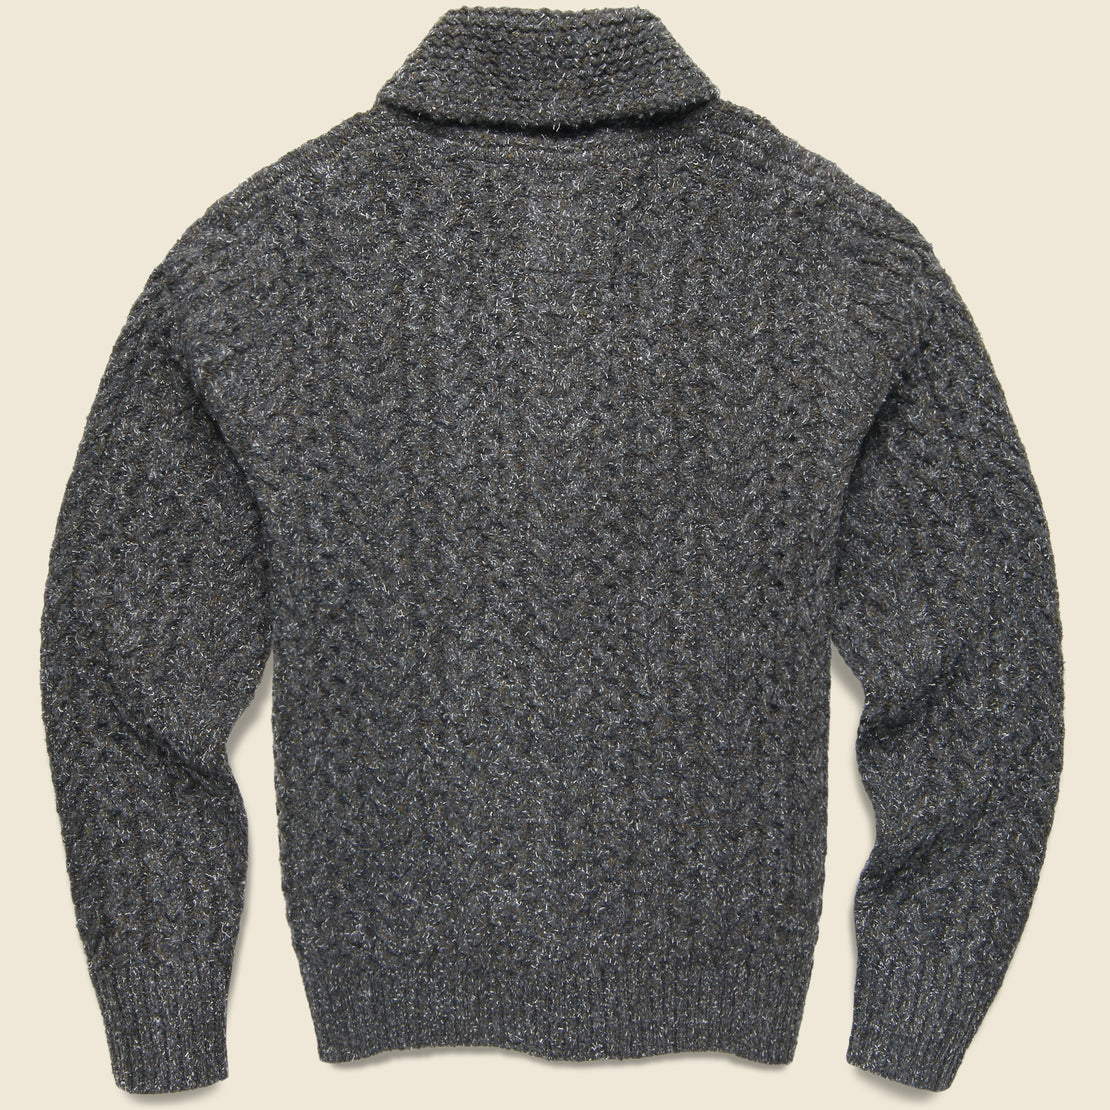 Melange Cable Shawl Cardigan - Charcoal - Grayers - STAG Provisions - Tops - Sweater